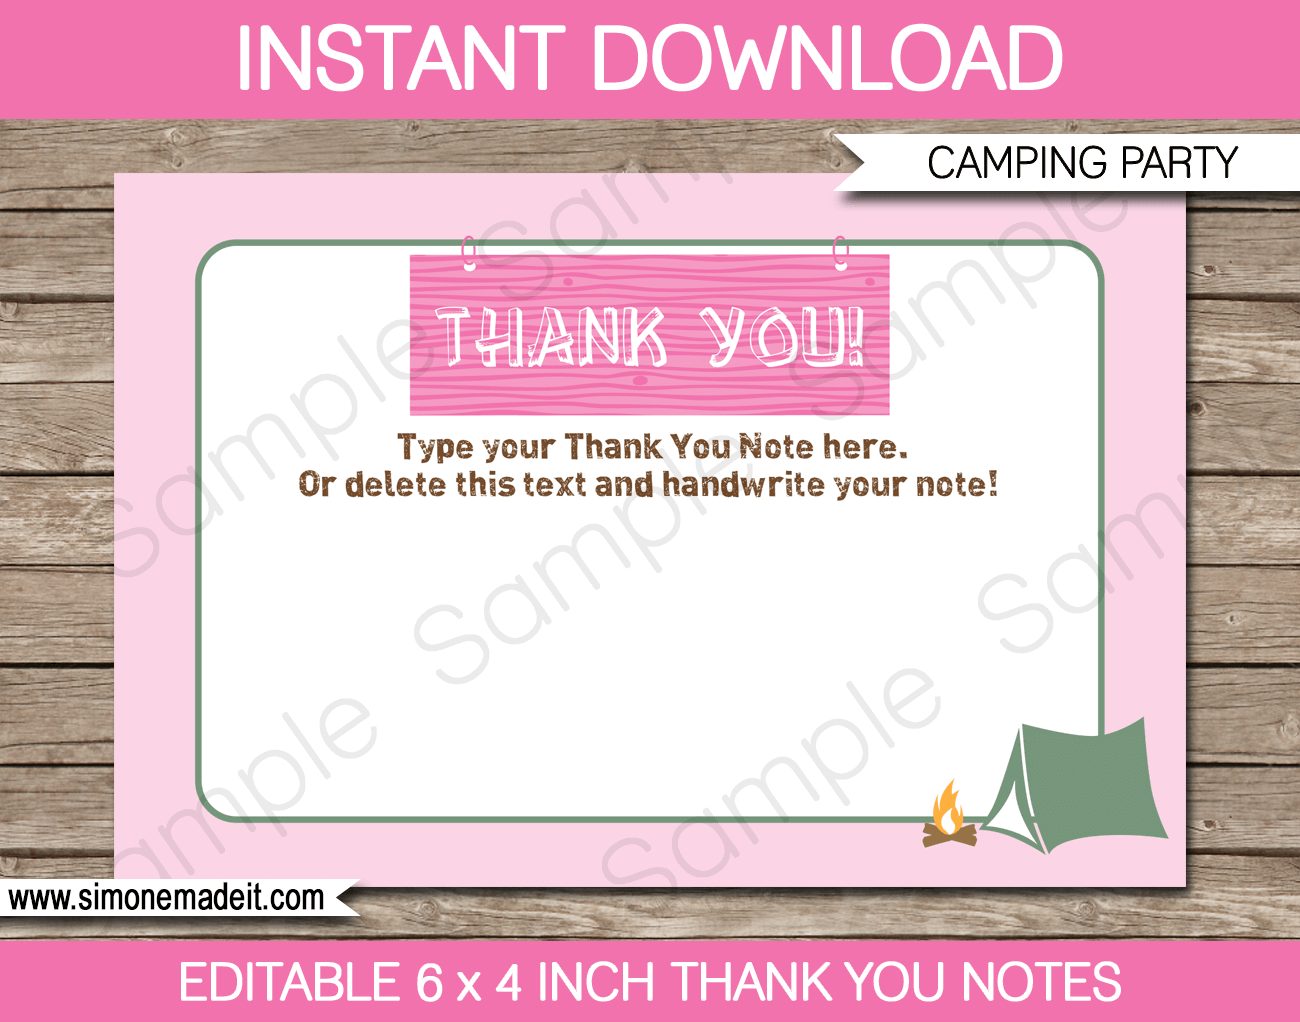 Camping Birthday Party Thank You Cards - Favor Tags - Camp or Camping theme - Pink Girls - Editable Template - Instant Download via simonemadeit.com